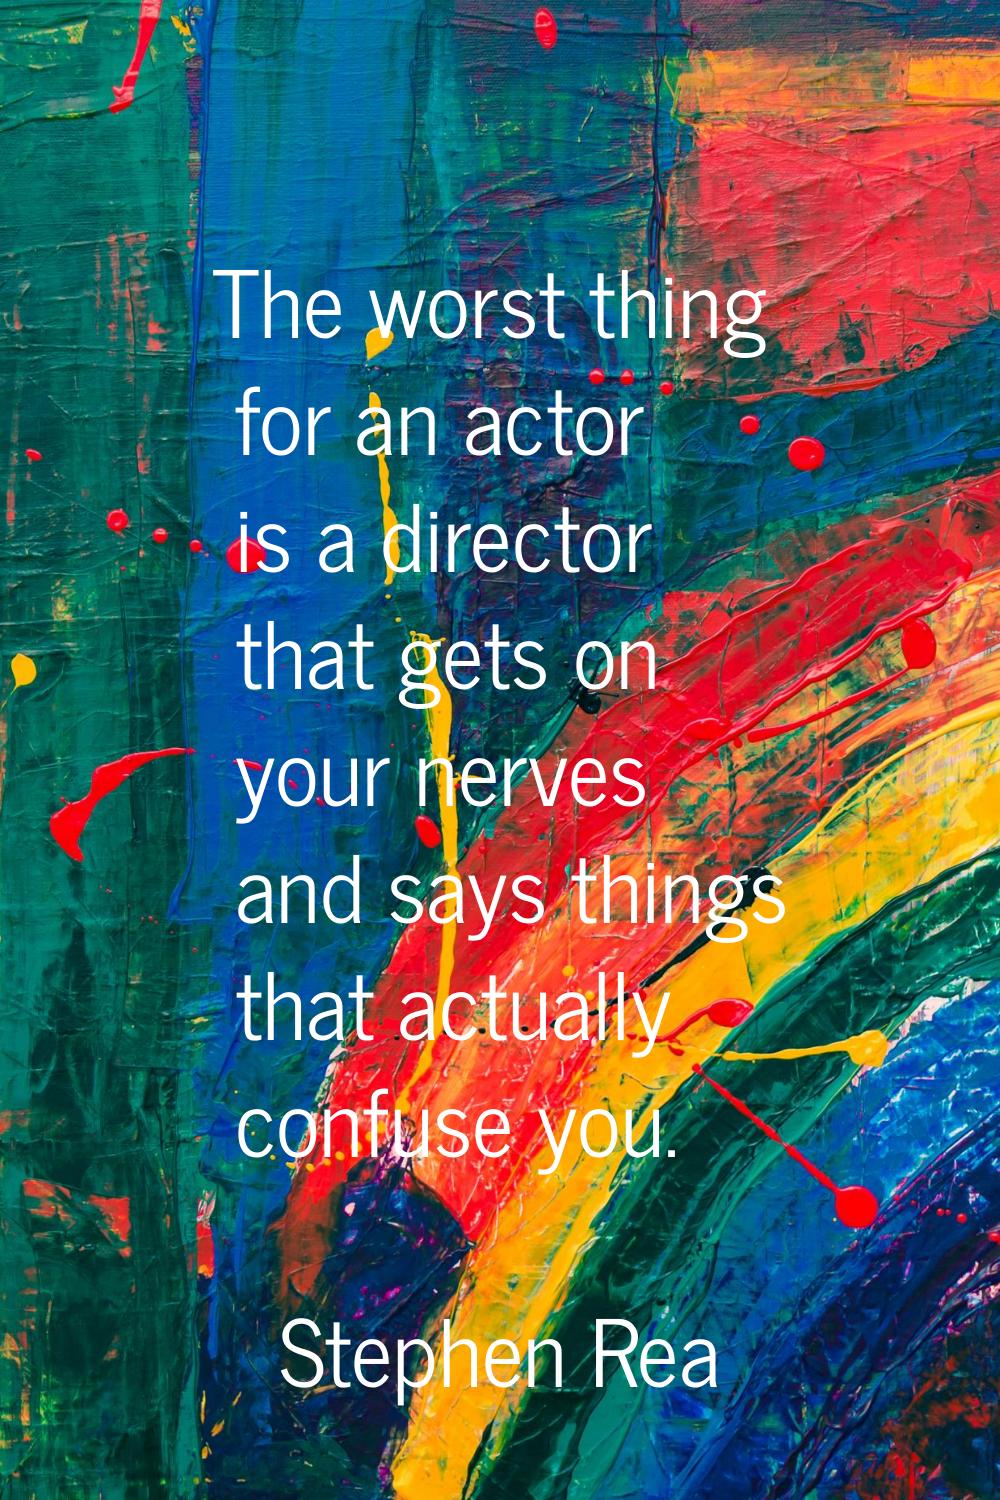 The worst thing for an actor is a director that gets on your nerves and says things that actually c